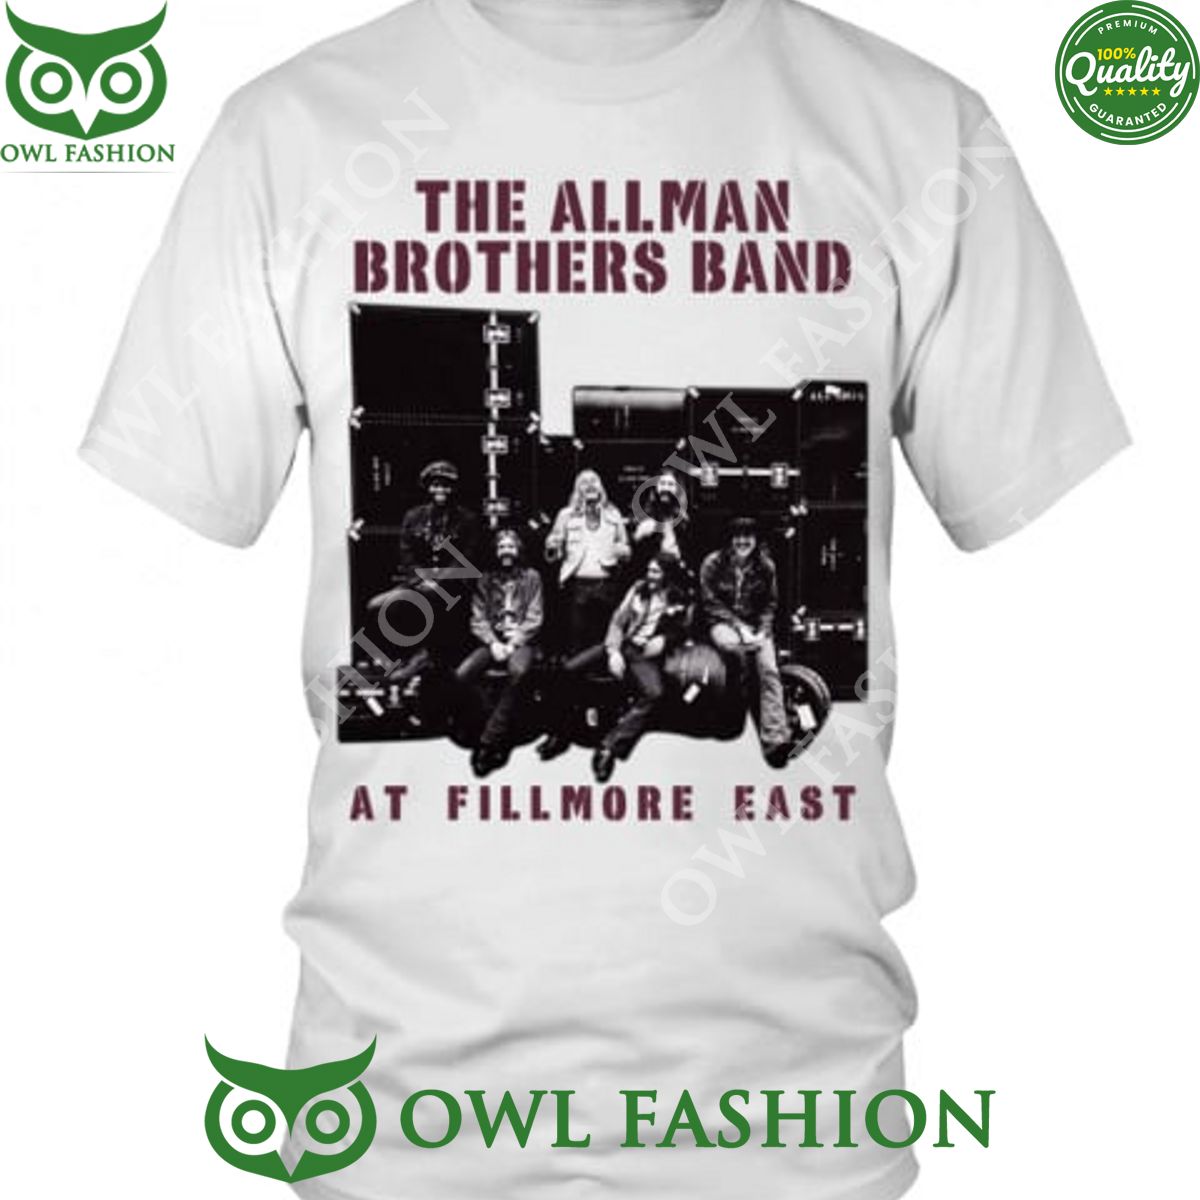 the allman brothers rock band at fillmore east t shirt 1 XLe5p.jpg